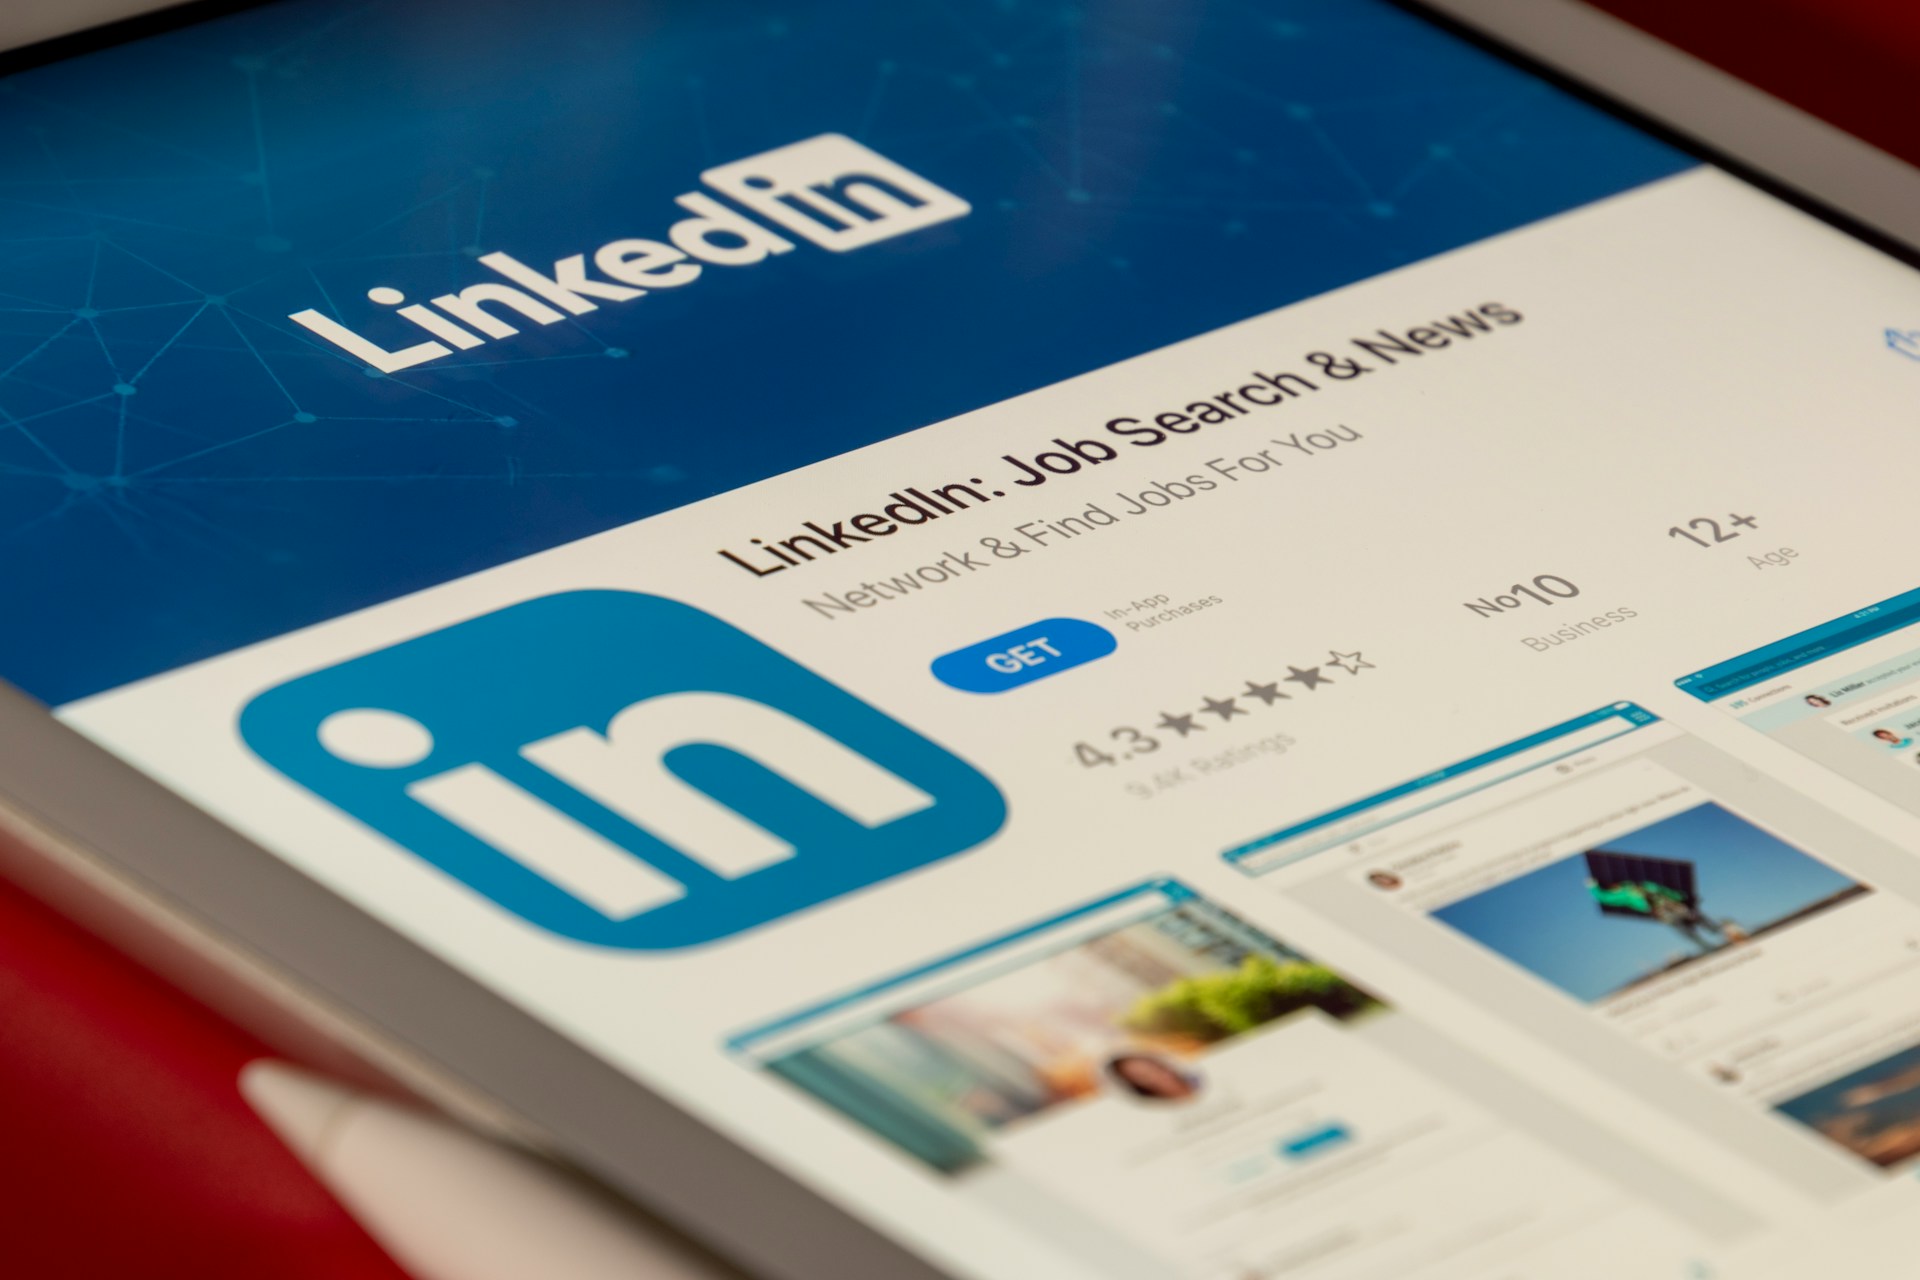 LinkedIn Rolls Out AI Assistant for Premium Members